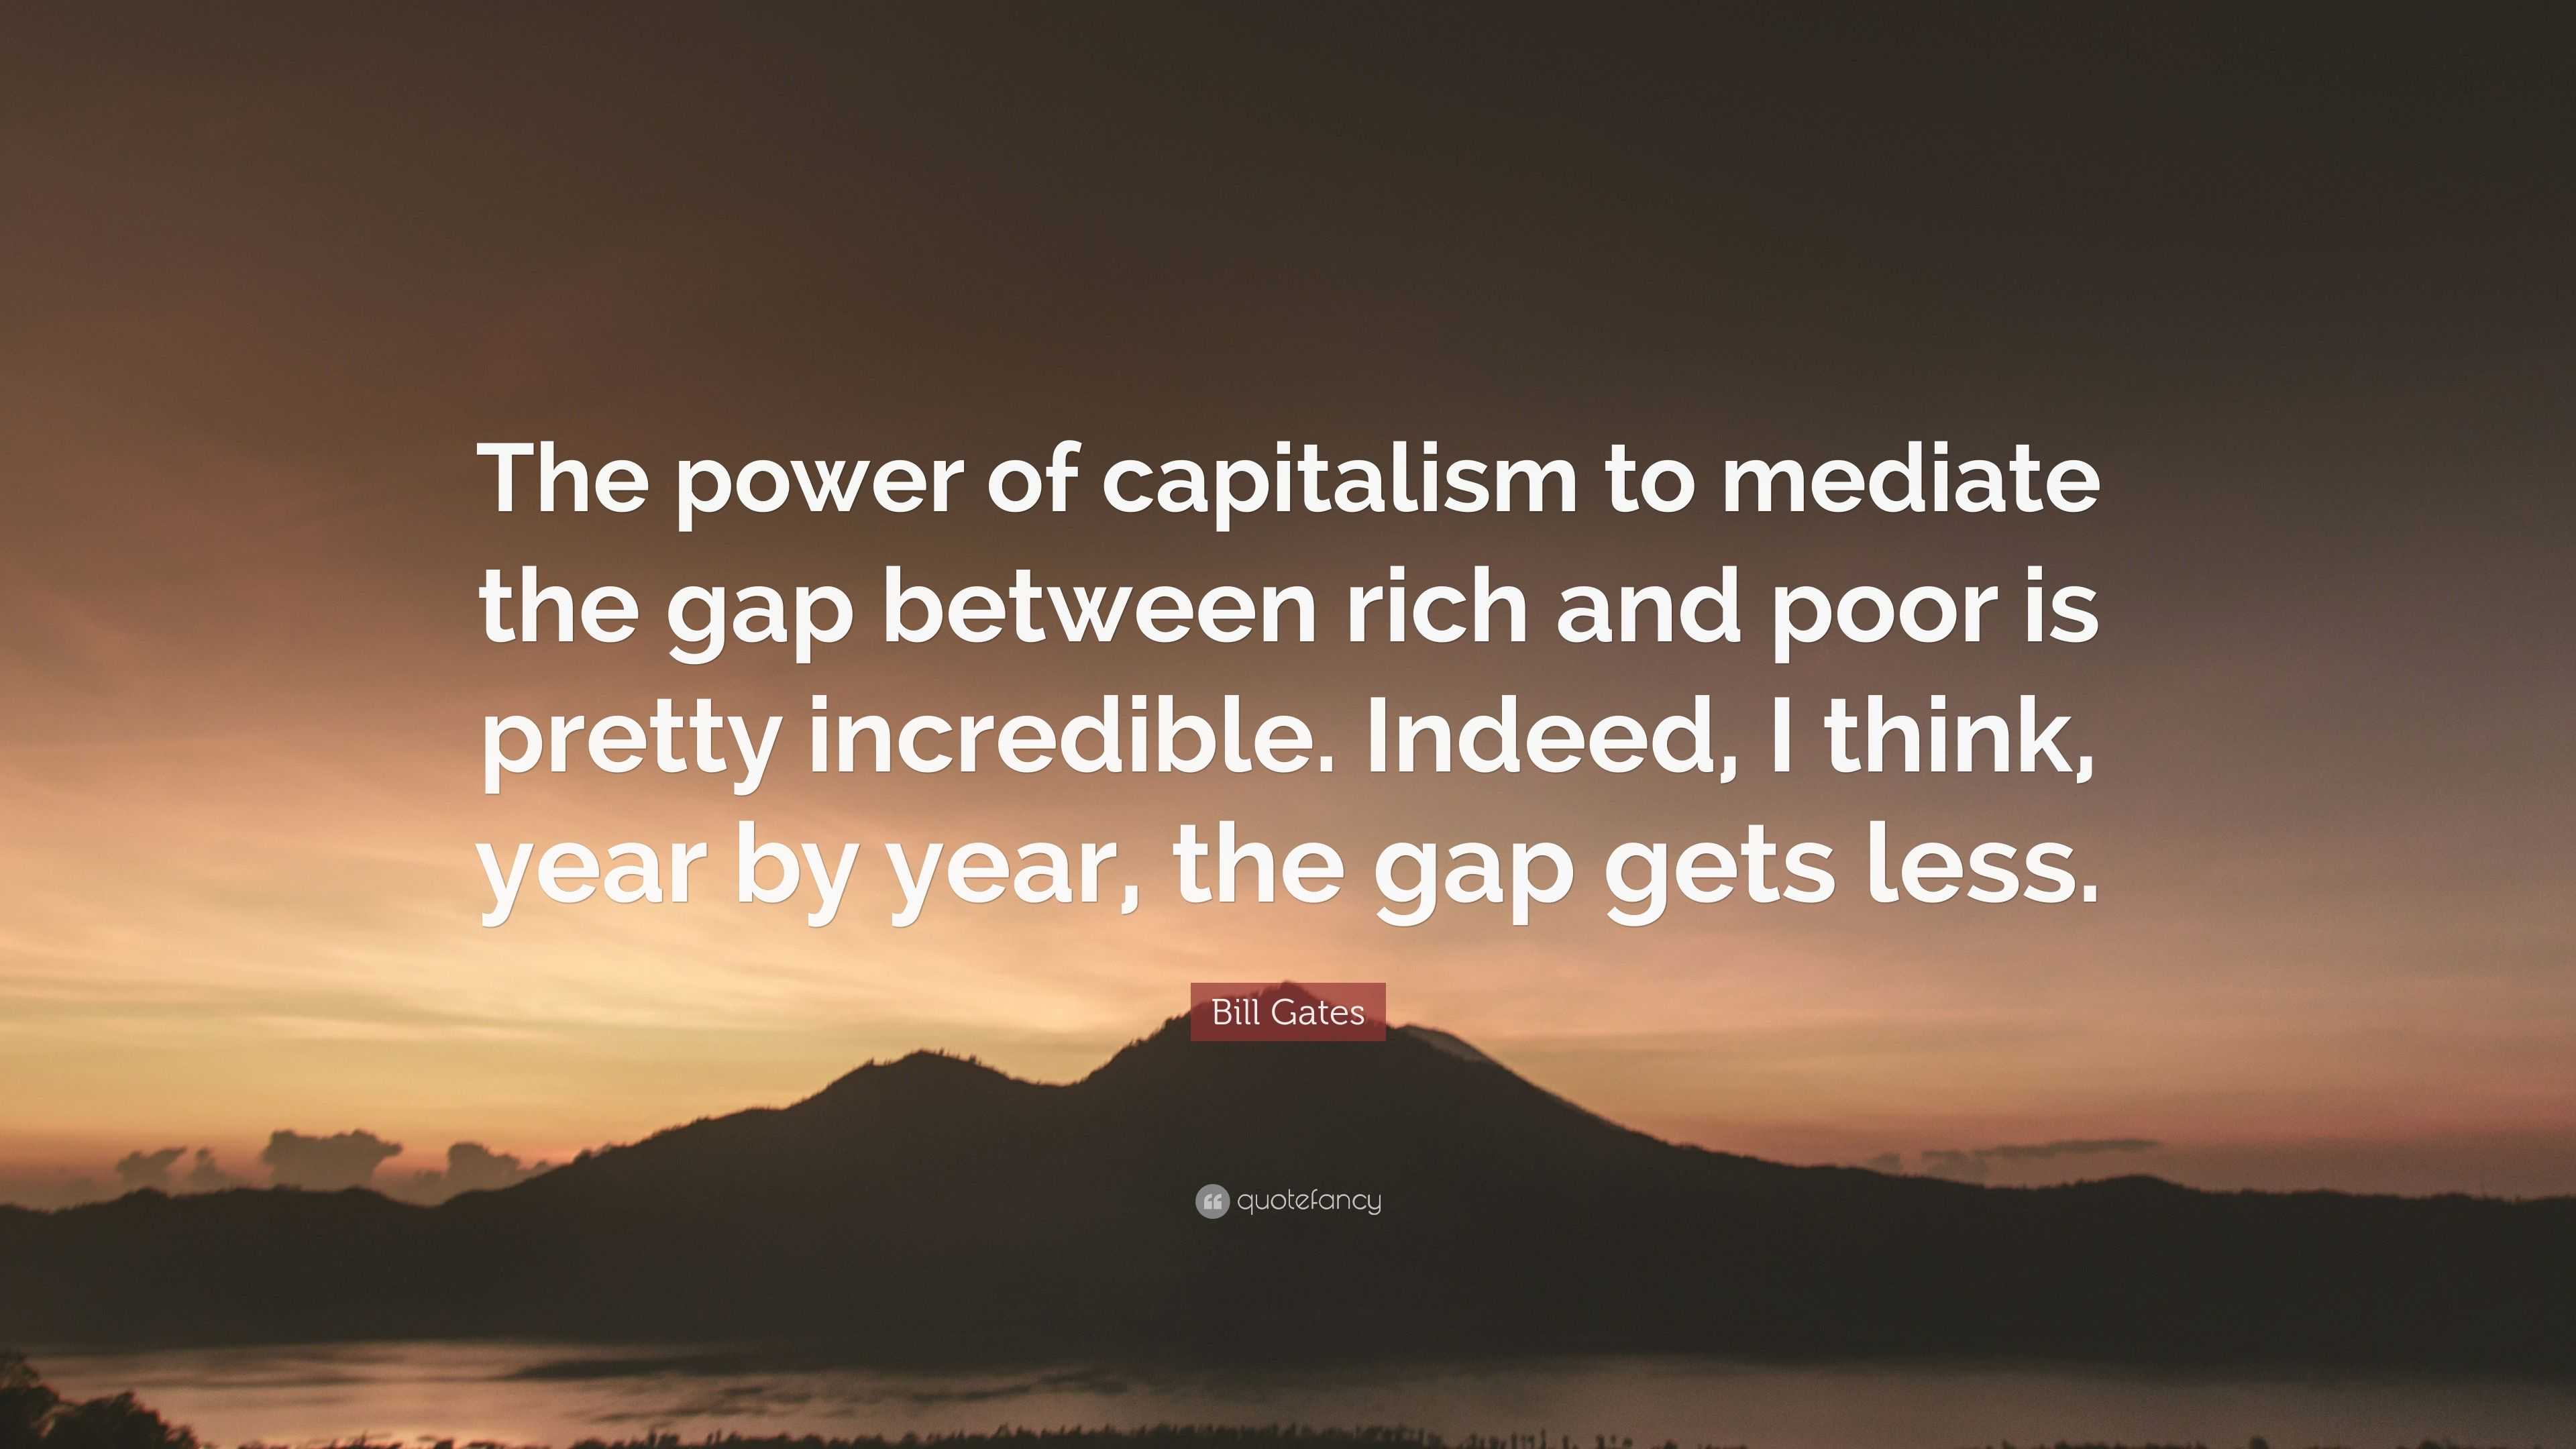 Bill Gates Quote: “The power of capitalism to mediate the gap between ...